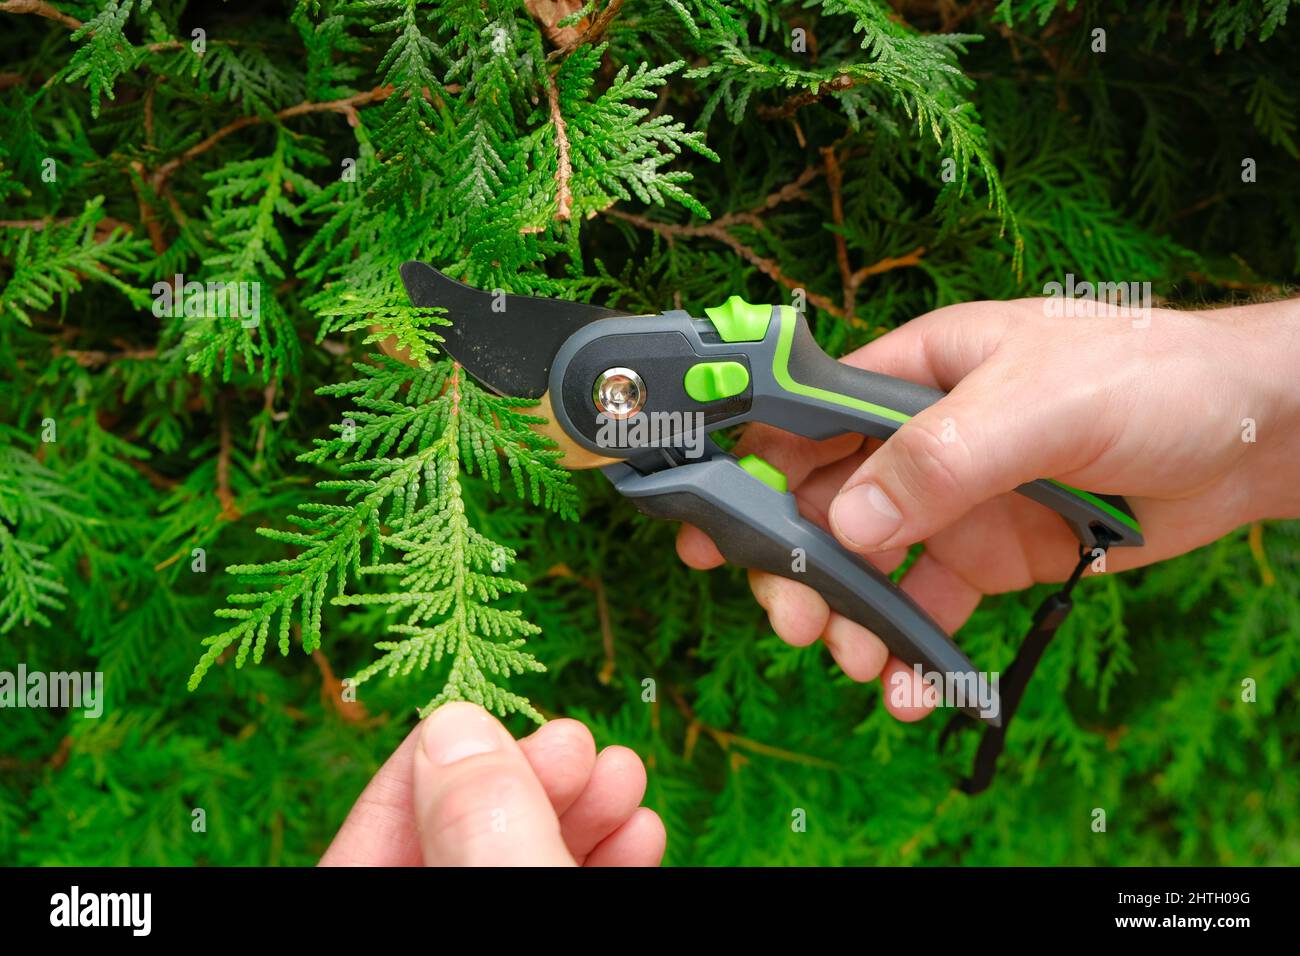 Gardening Tools.Spring gardening. Garden shears in male hands close-up cutting a hedge.Plant pruning.Gardening and plant formation. Pruning thuja.. Stock Photo